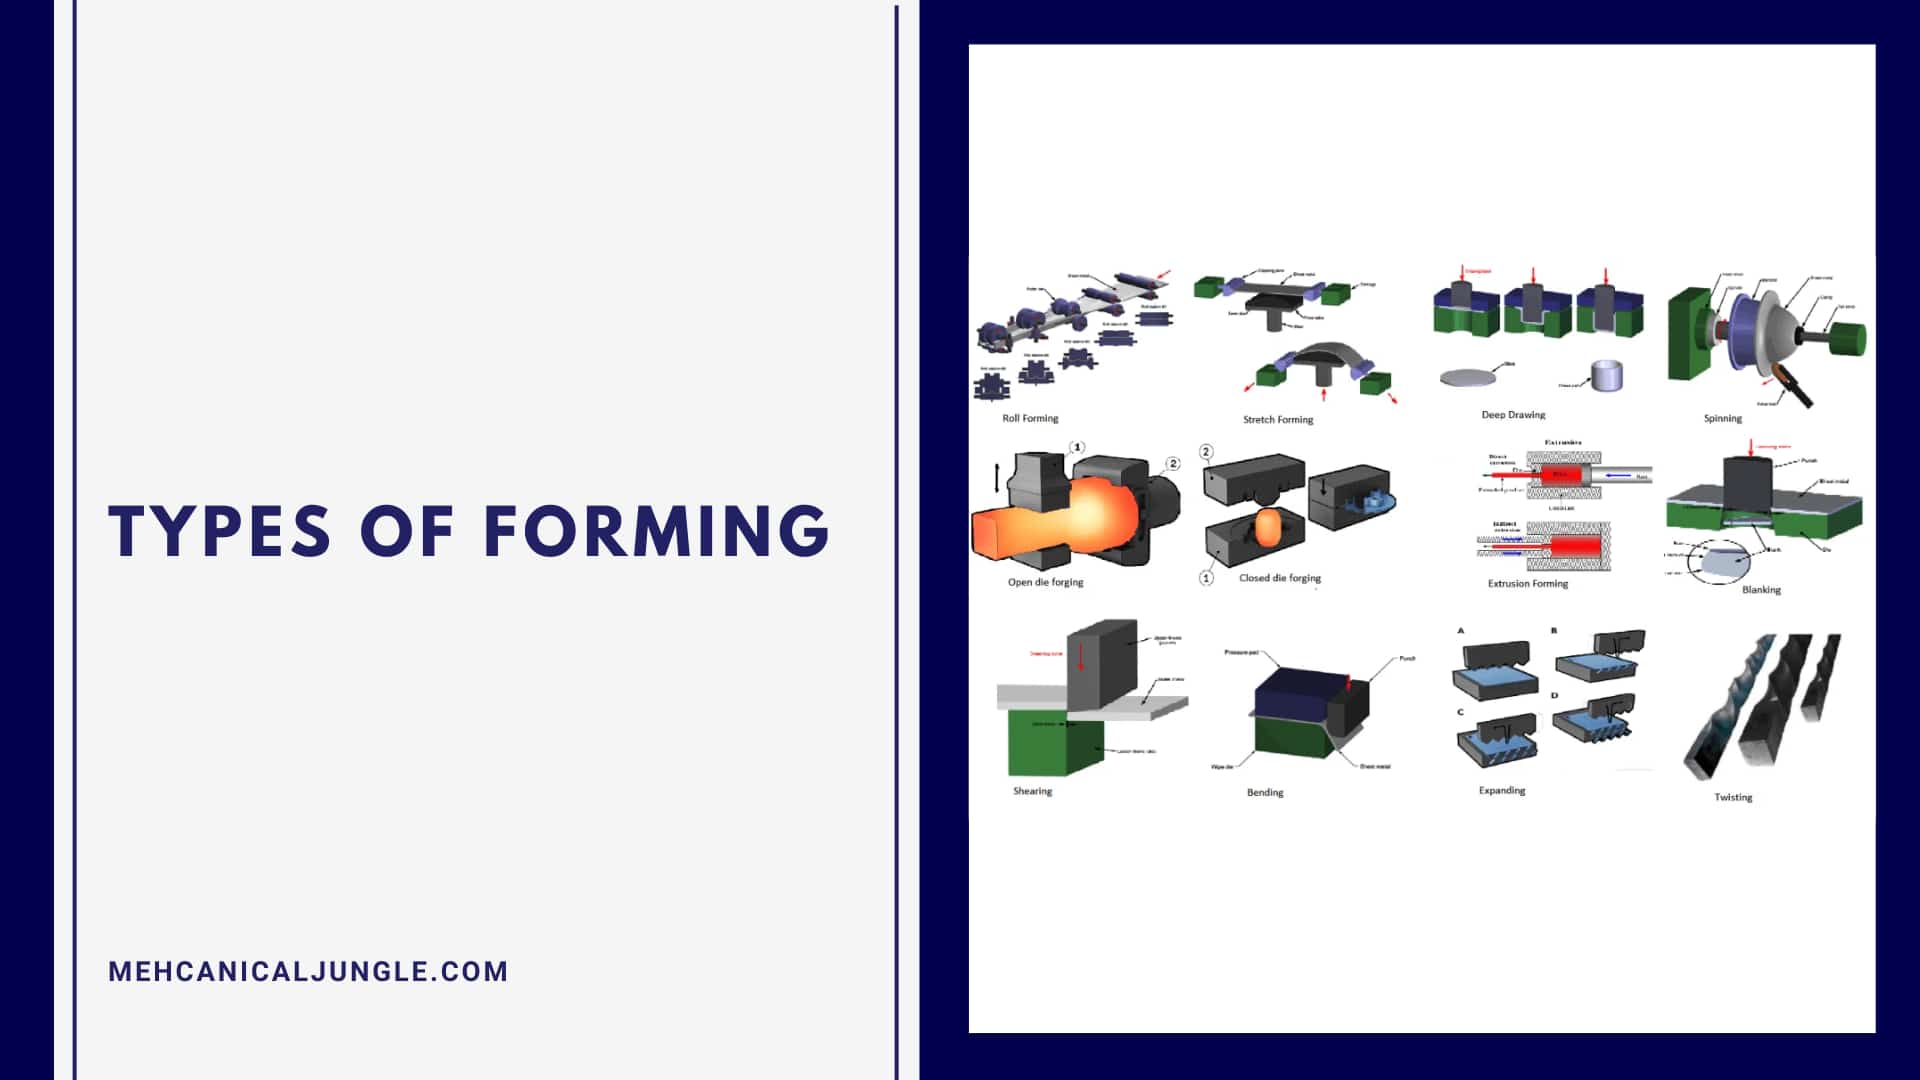 Types of Forming